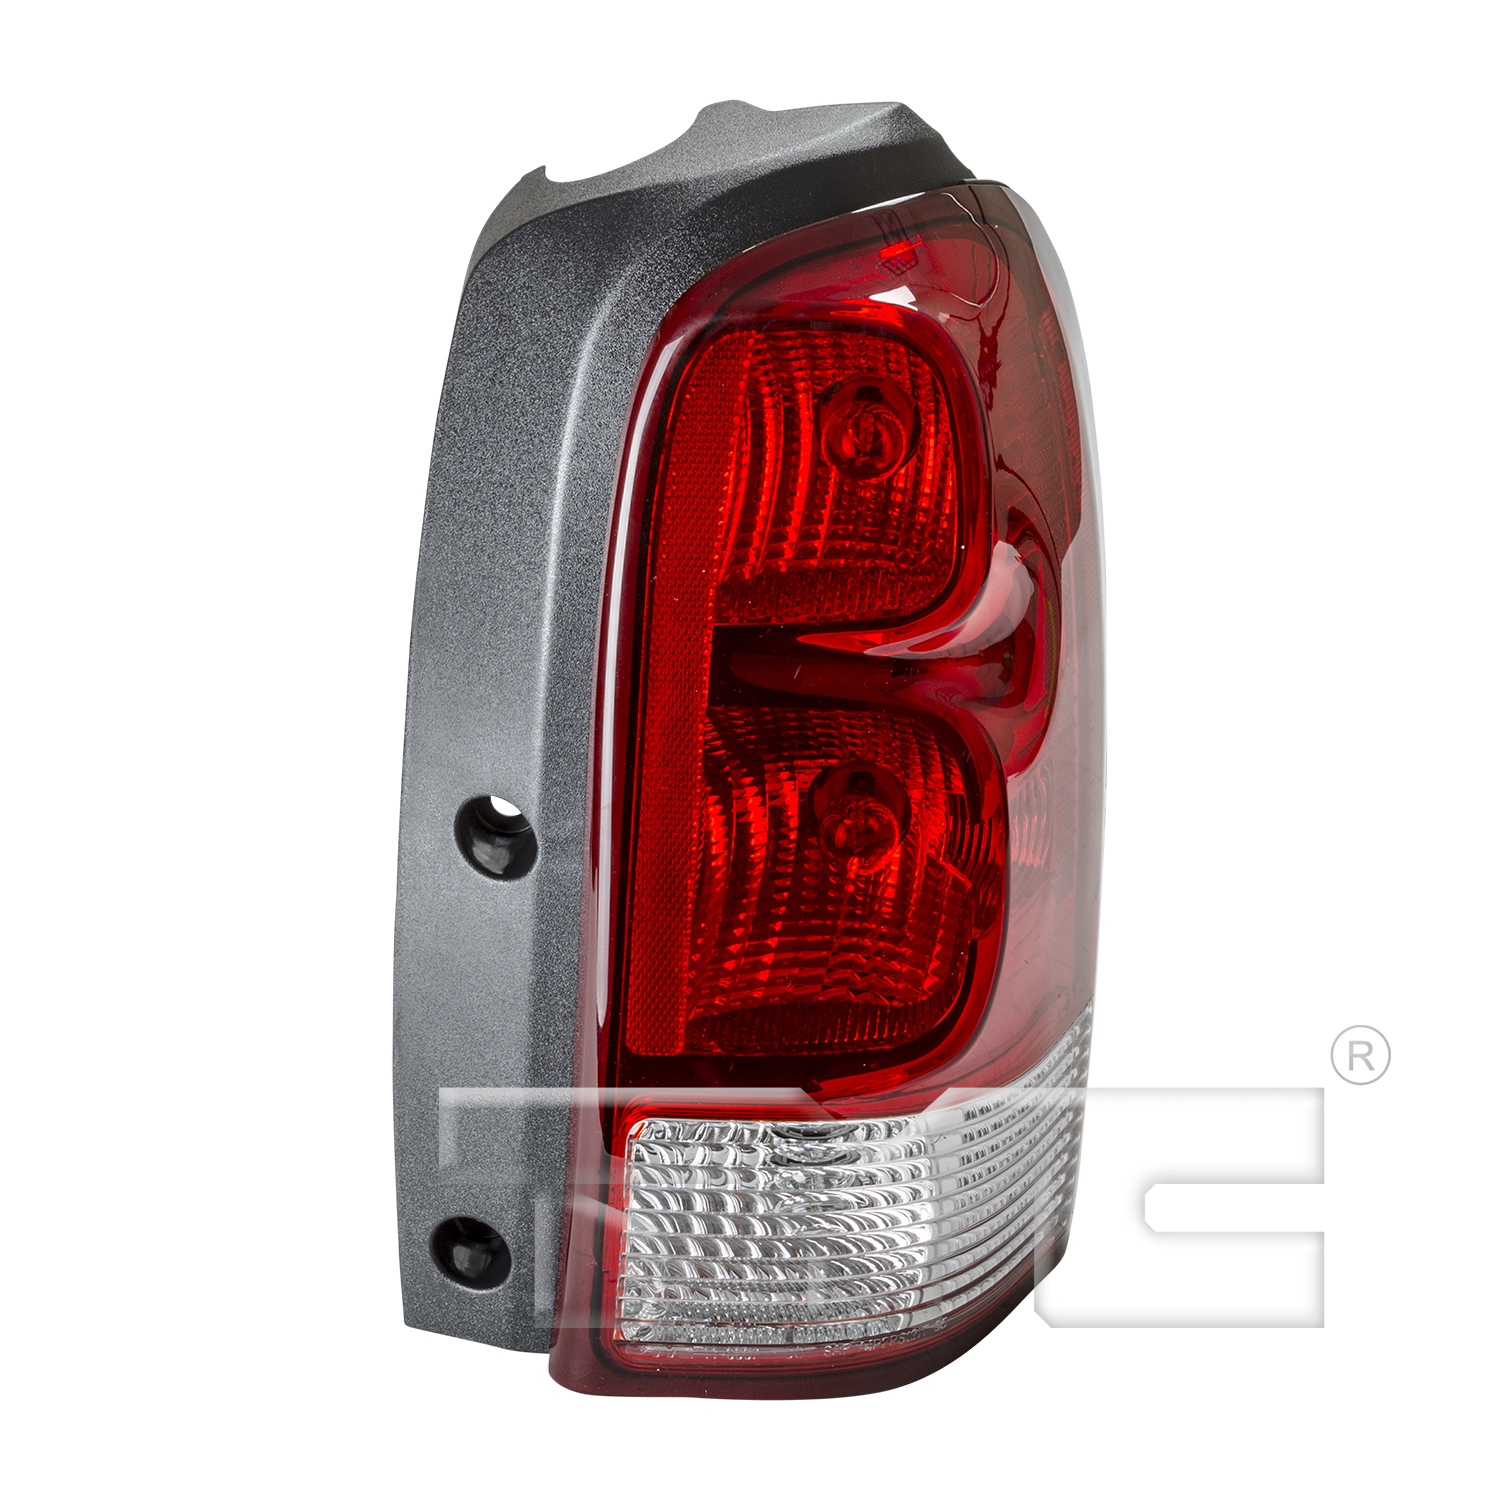 Aftermarket TAILLIGHTS for SATURN - RELAY, RELAY,05-07,RT Taillamp assy